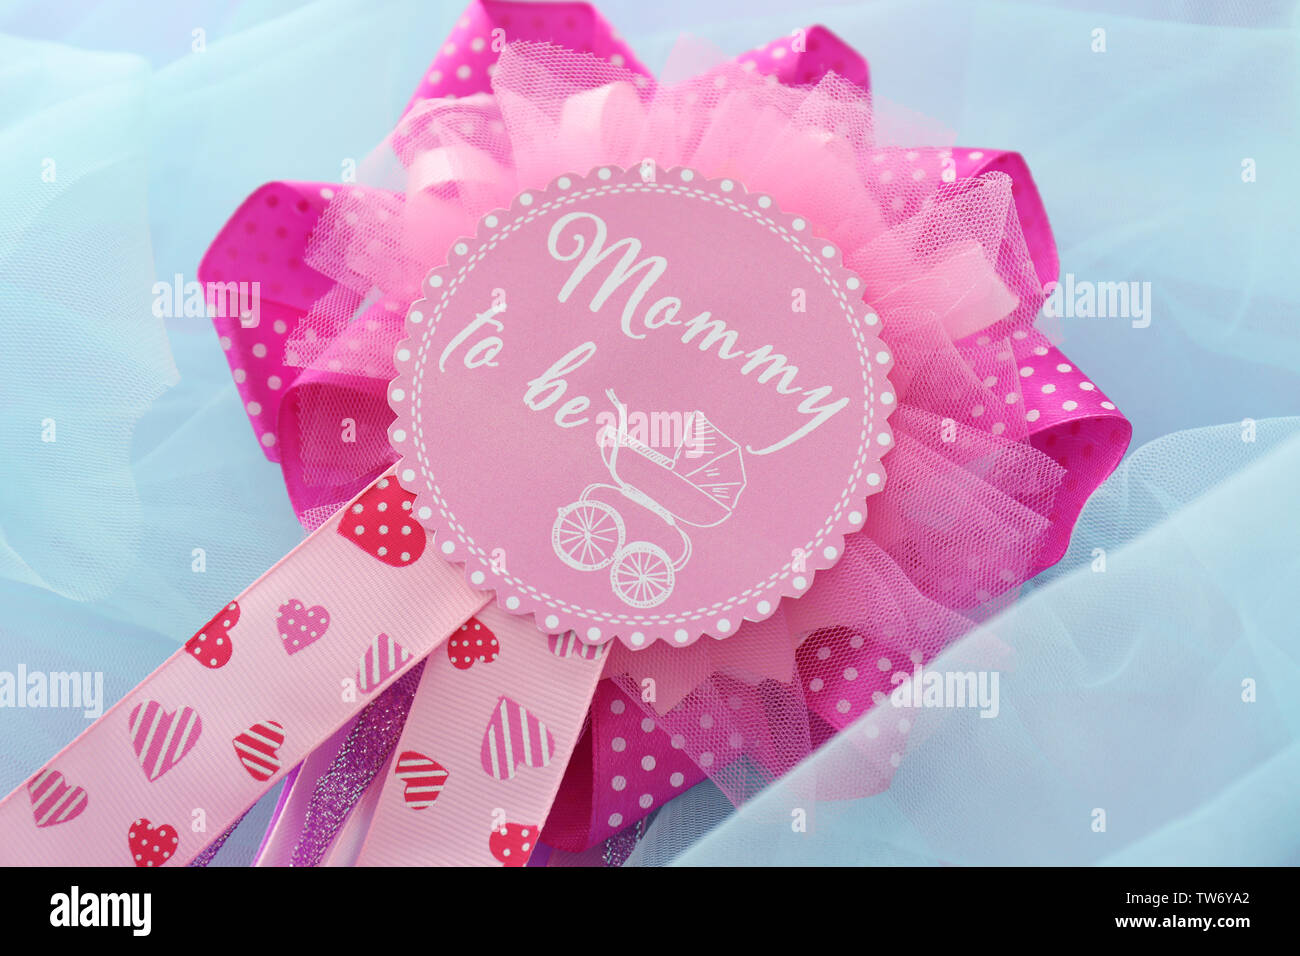 Award ribbon for baby shower party Stock Photo by ©belchonock 172529828